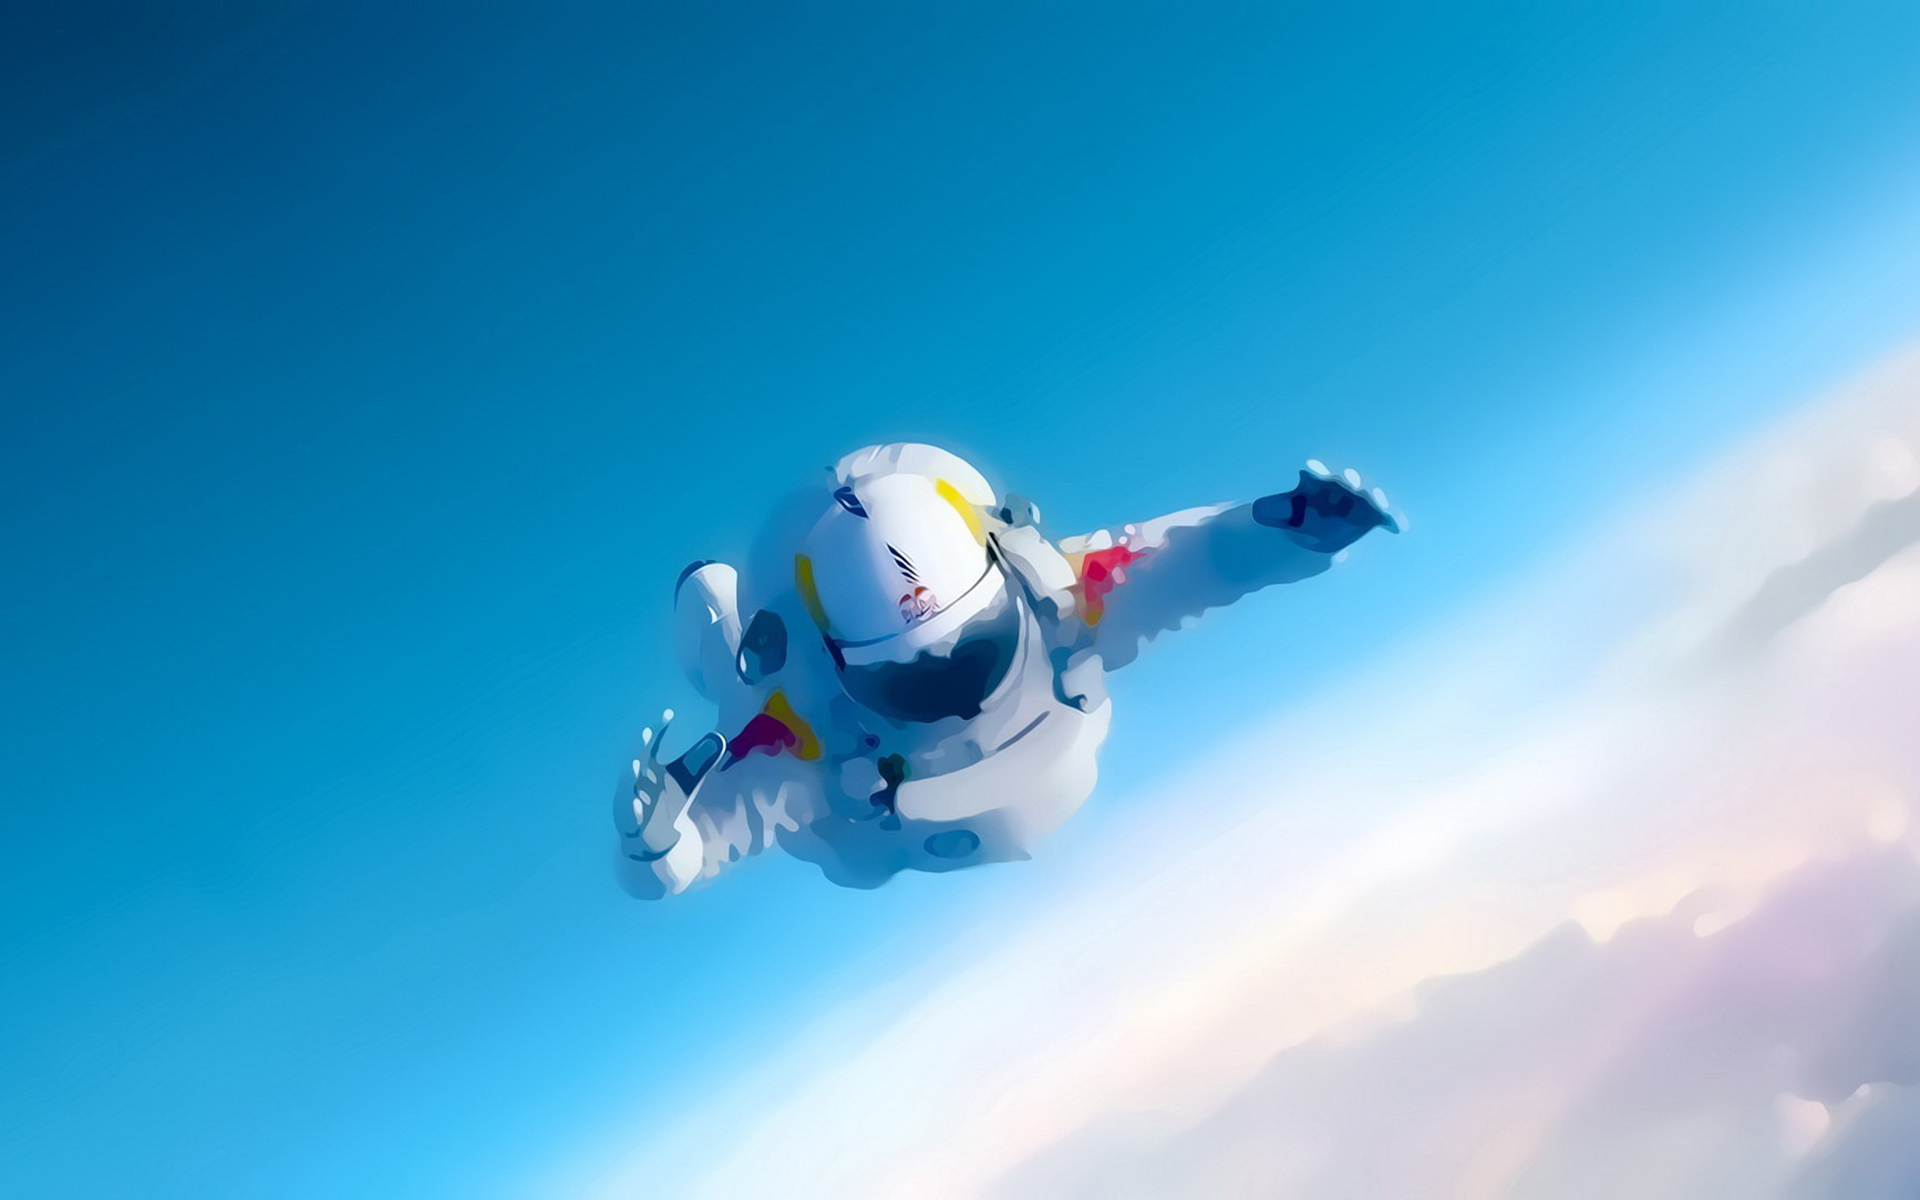 Astronaut Red Bull Sky Skydiving 1920x1200